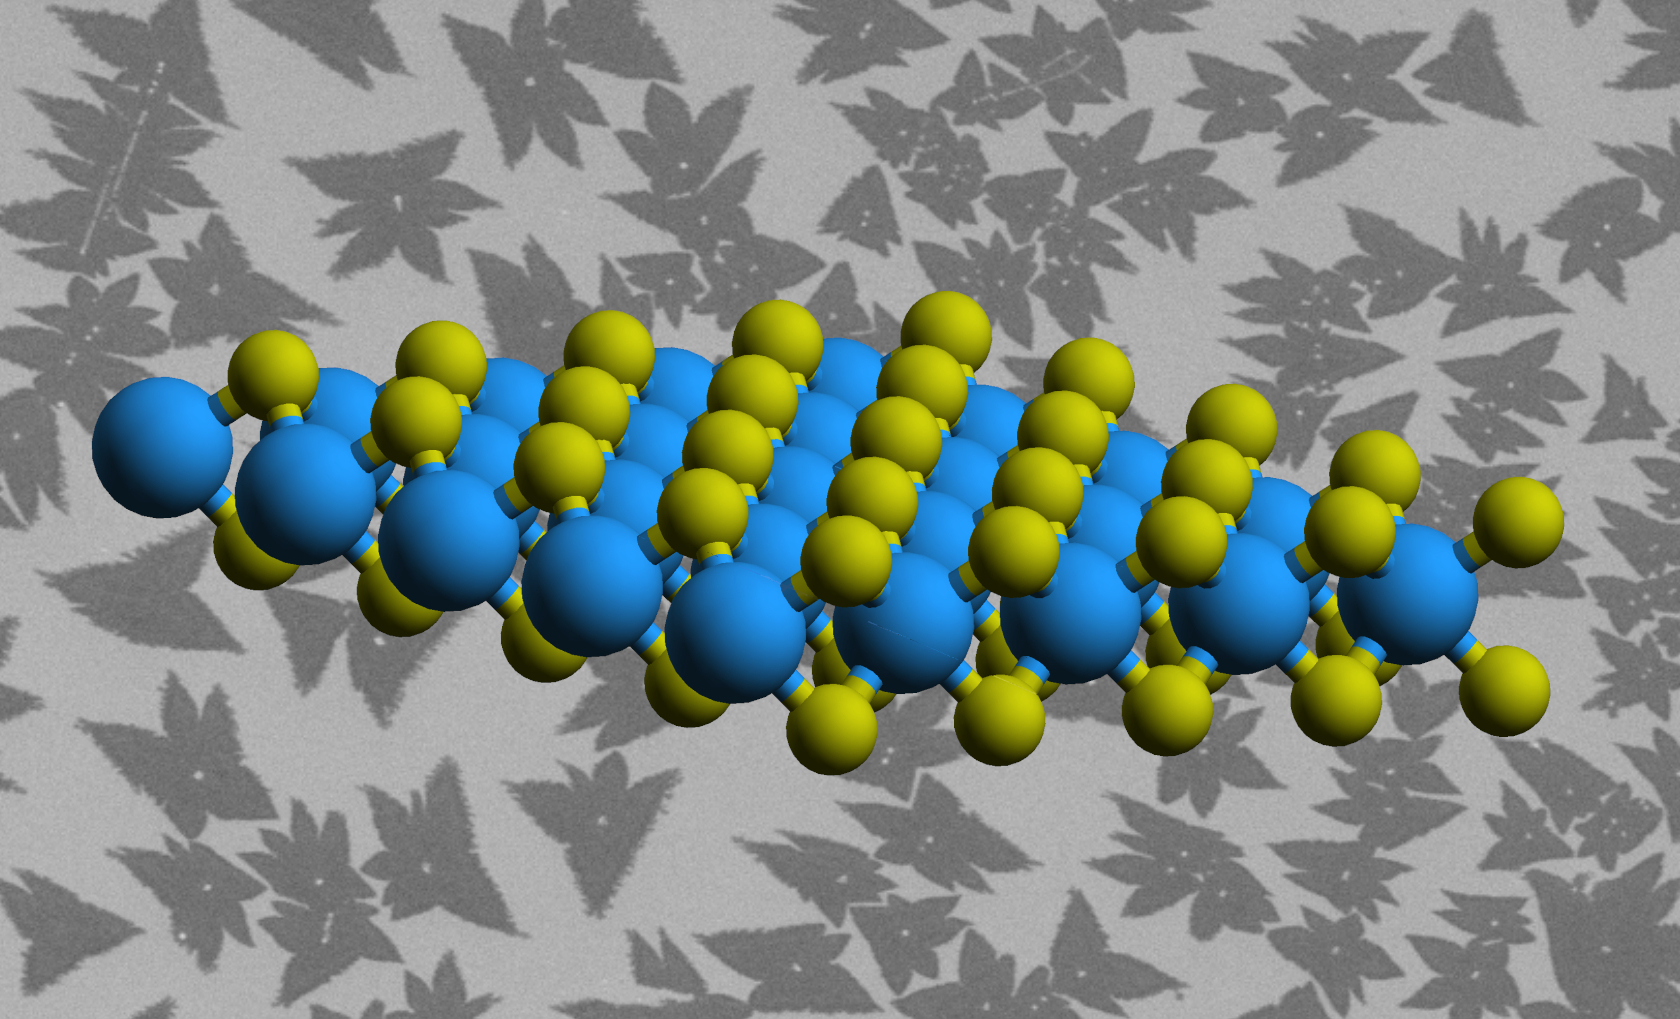 Image - This image, taken at Berkeley Lab's Molecular Foundry, shows an illustration of the atomic structure of a 2D material called tungsten disulfide. Tungsten atoms are shown in blue and sulfur atoms are shown in yellow. The background shows groupings of flakes of the material (dark gray) grown by a process called chemical vapor deposition on a titanium dioxide layer (light gray). (Credit: Katherine Cochrane/Berkeley Lab)